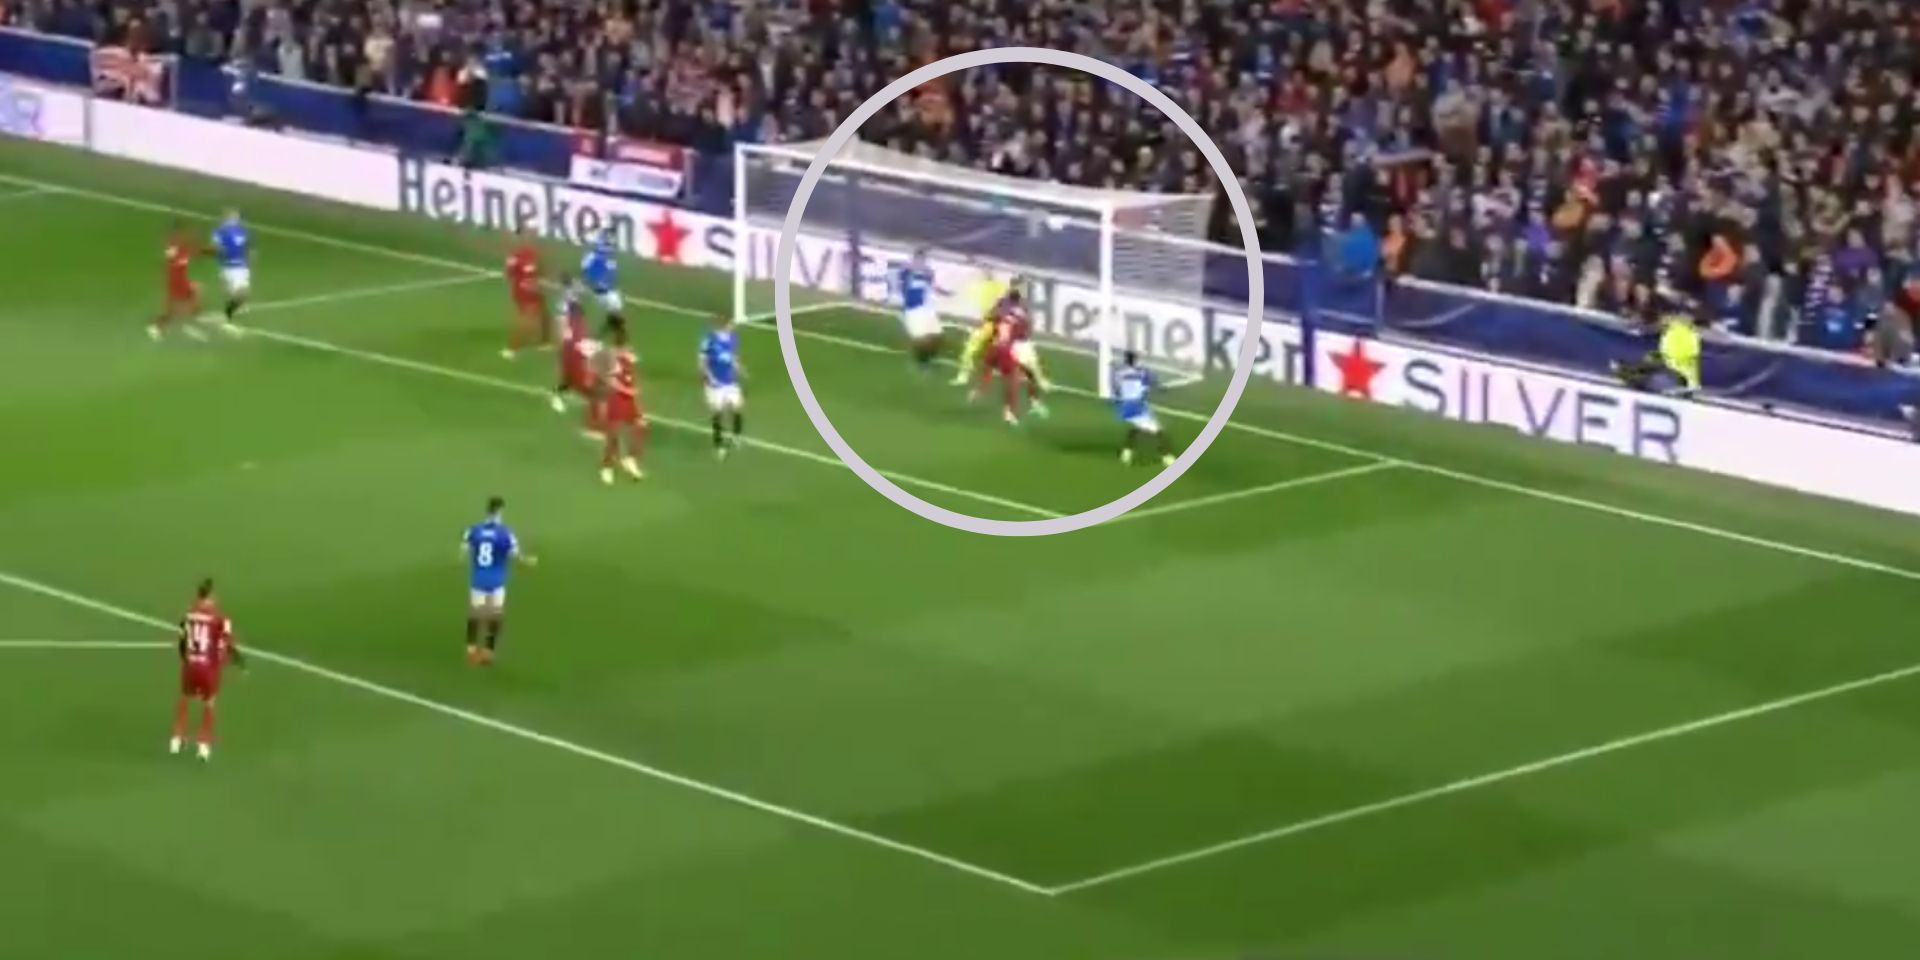 (Video) Firmino gets Liverpool back level as he cutely converts a Tsimikas corner at Ibrox